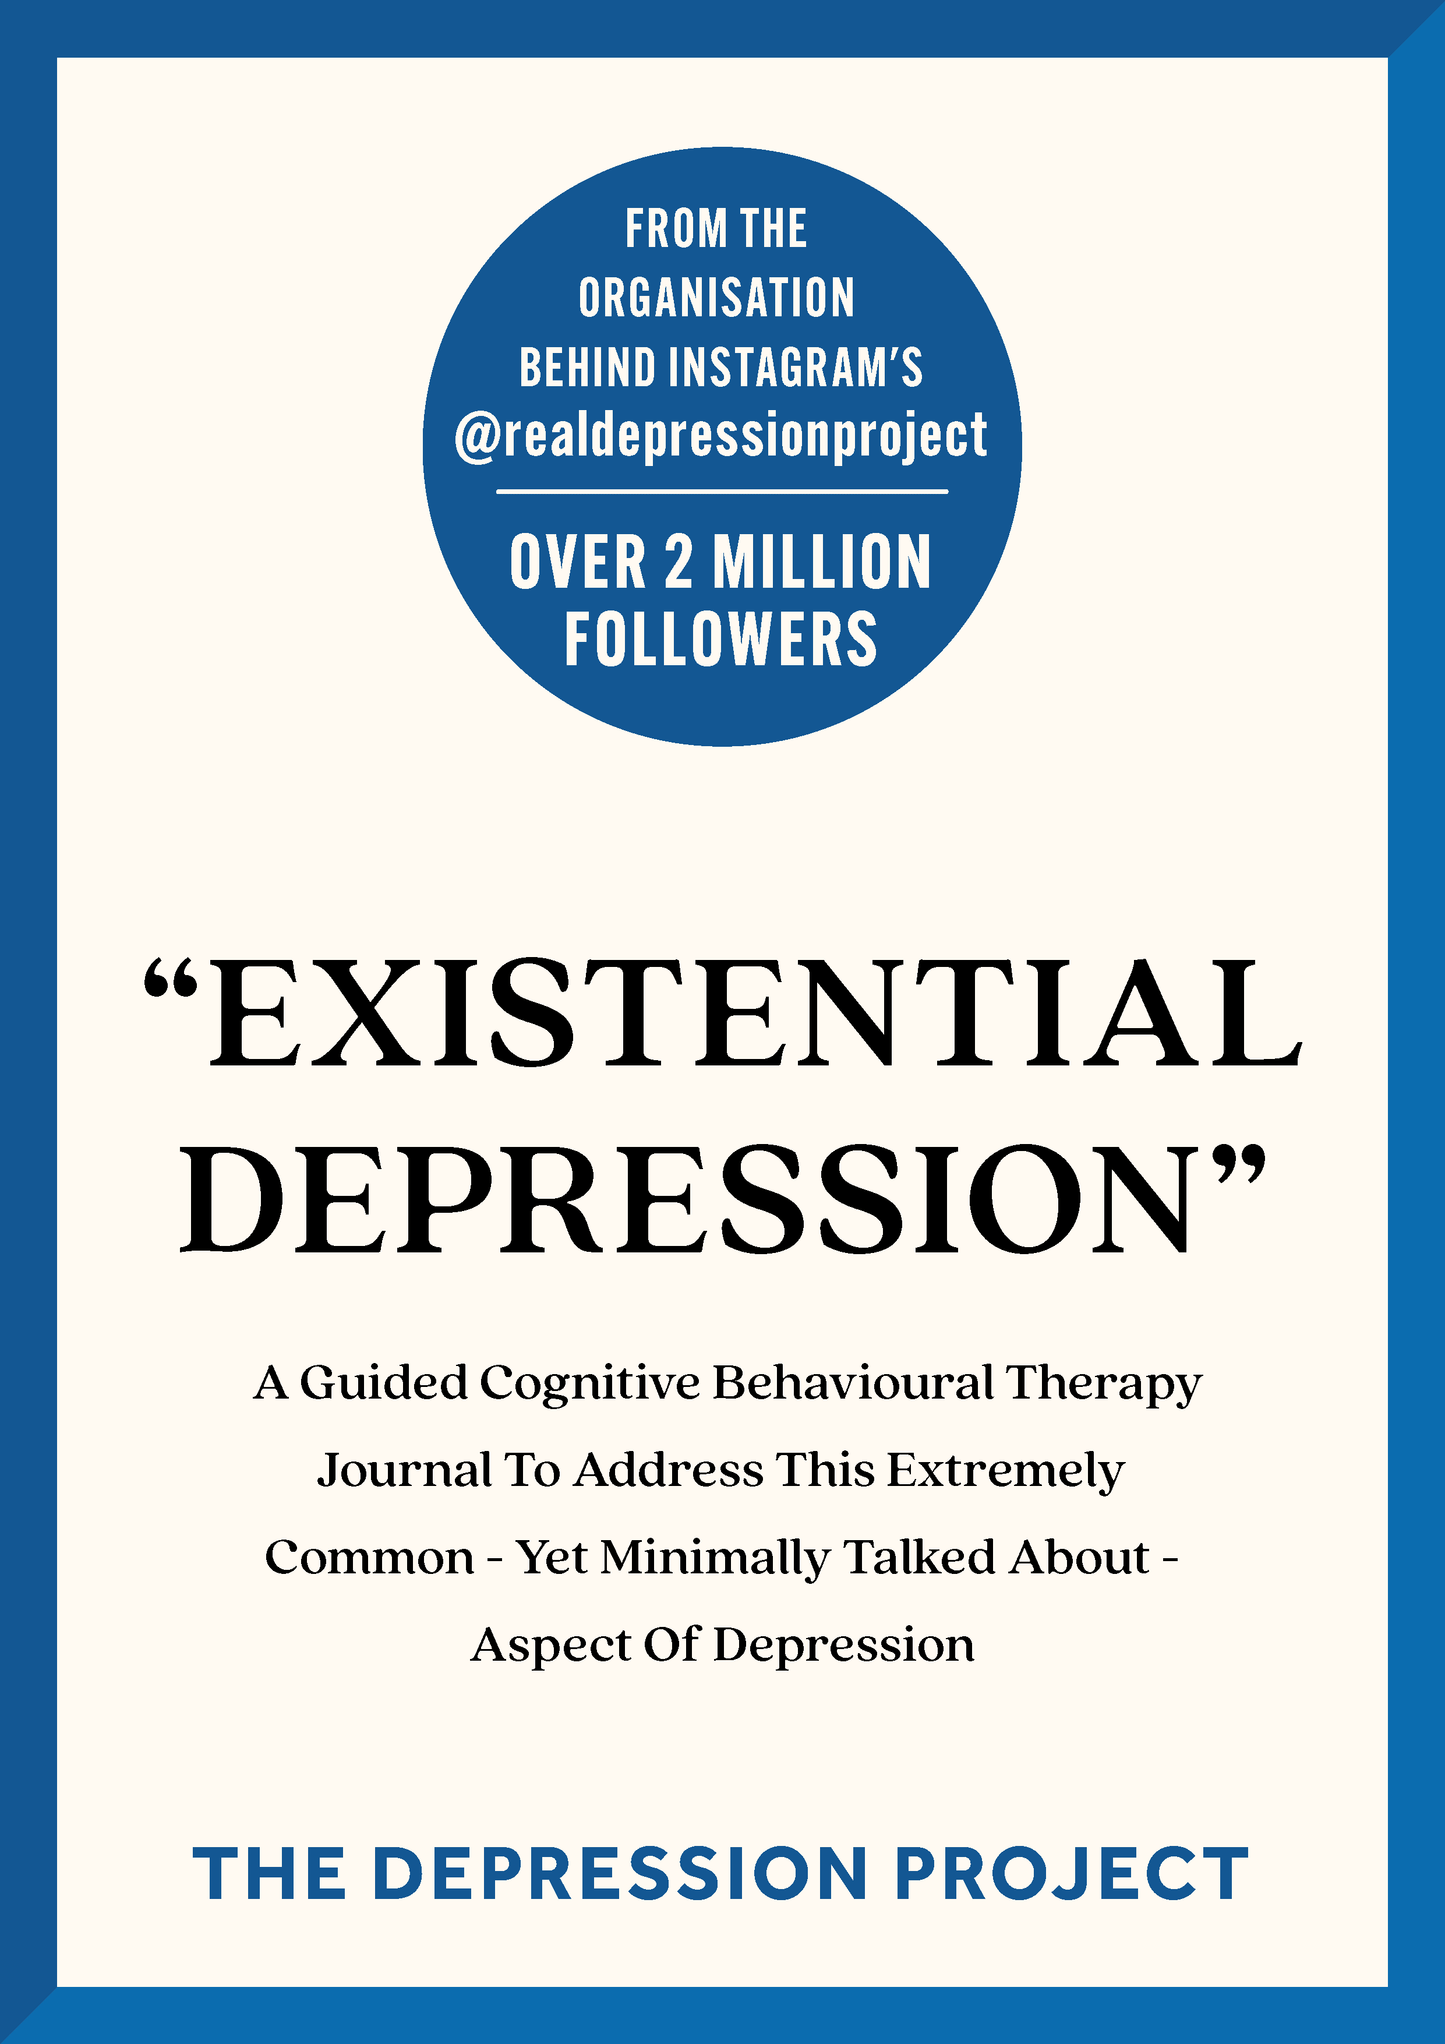 The "Existential Depression" Journal - The Depression Project